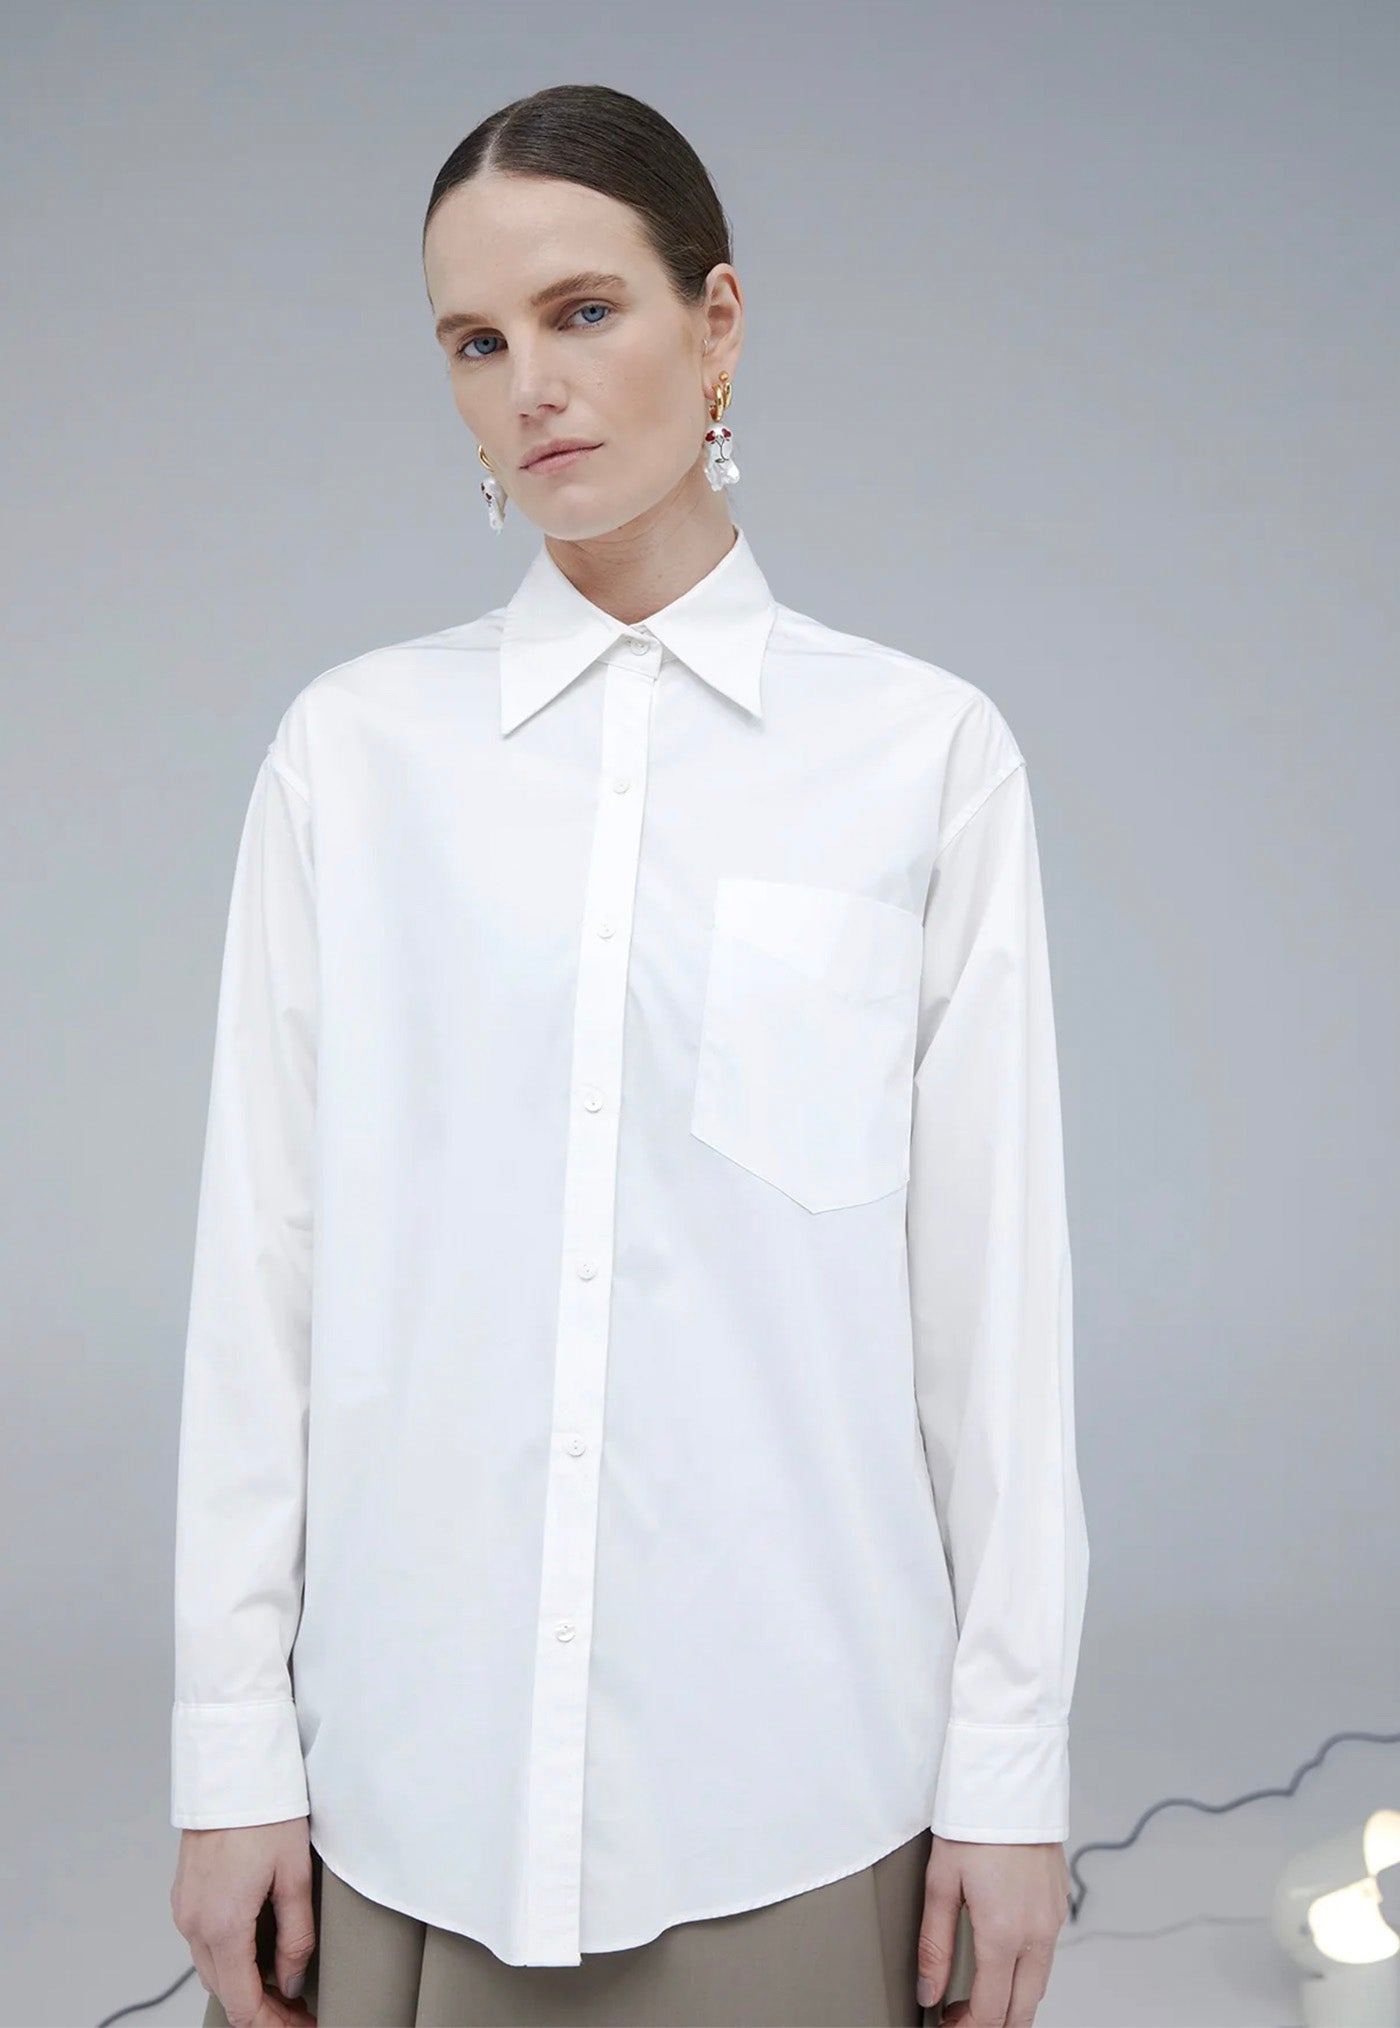 Kantor Shirt - White sold by Angel Divine